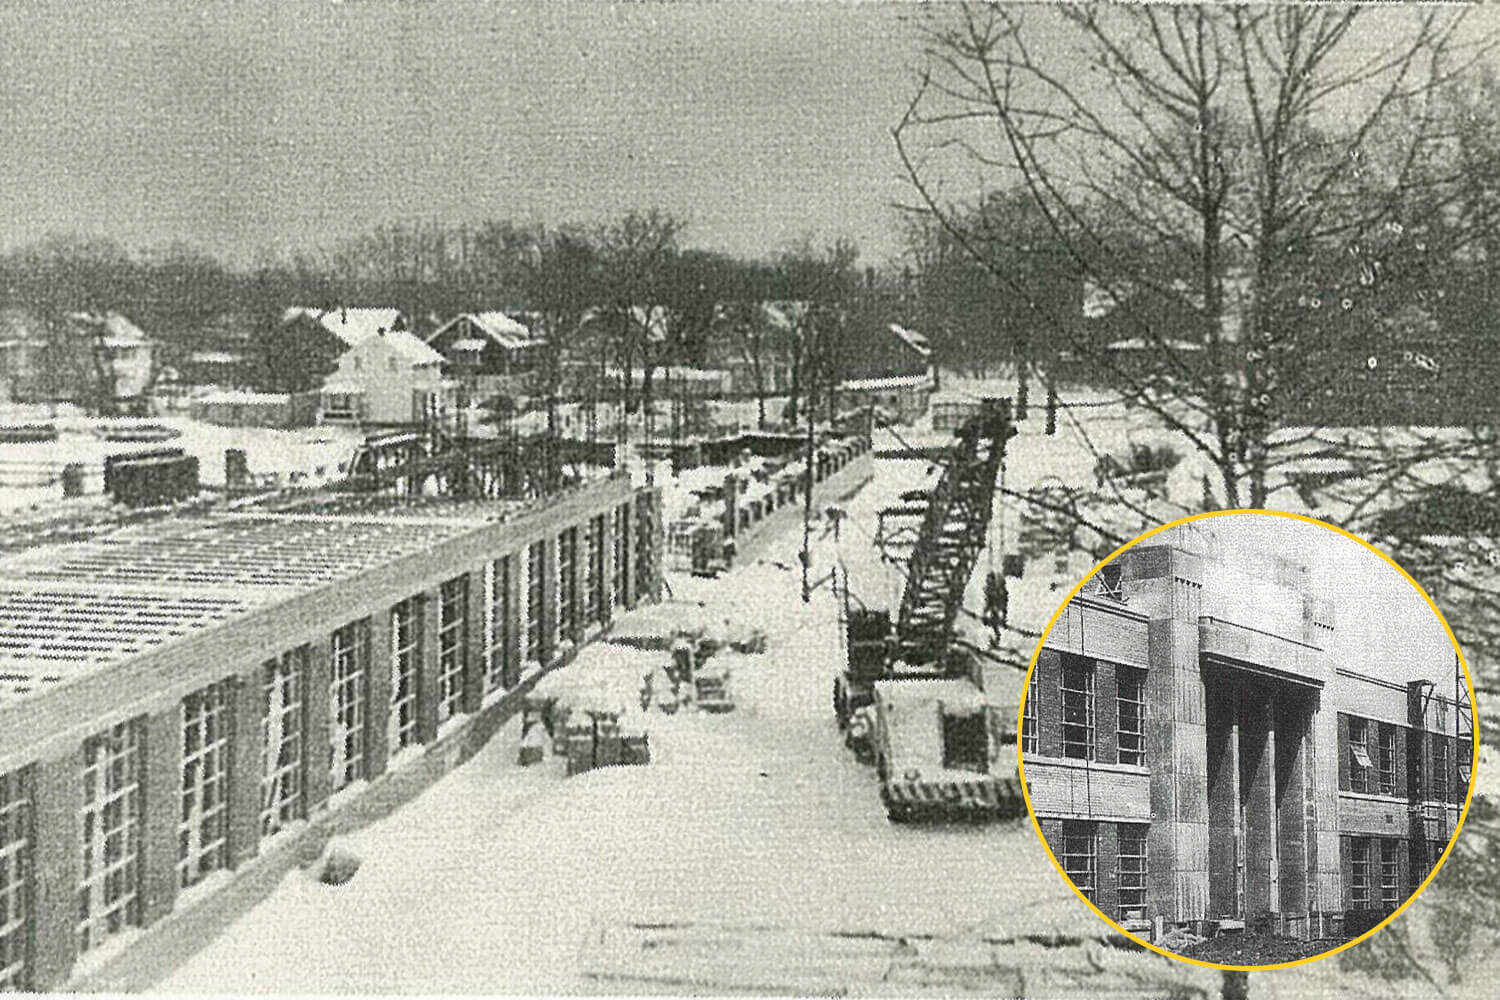 st. edward high school under construction after its founding in 1949